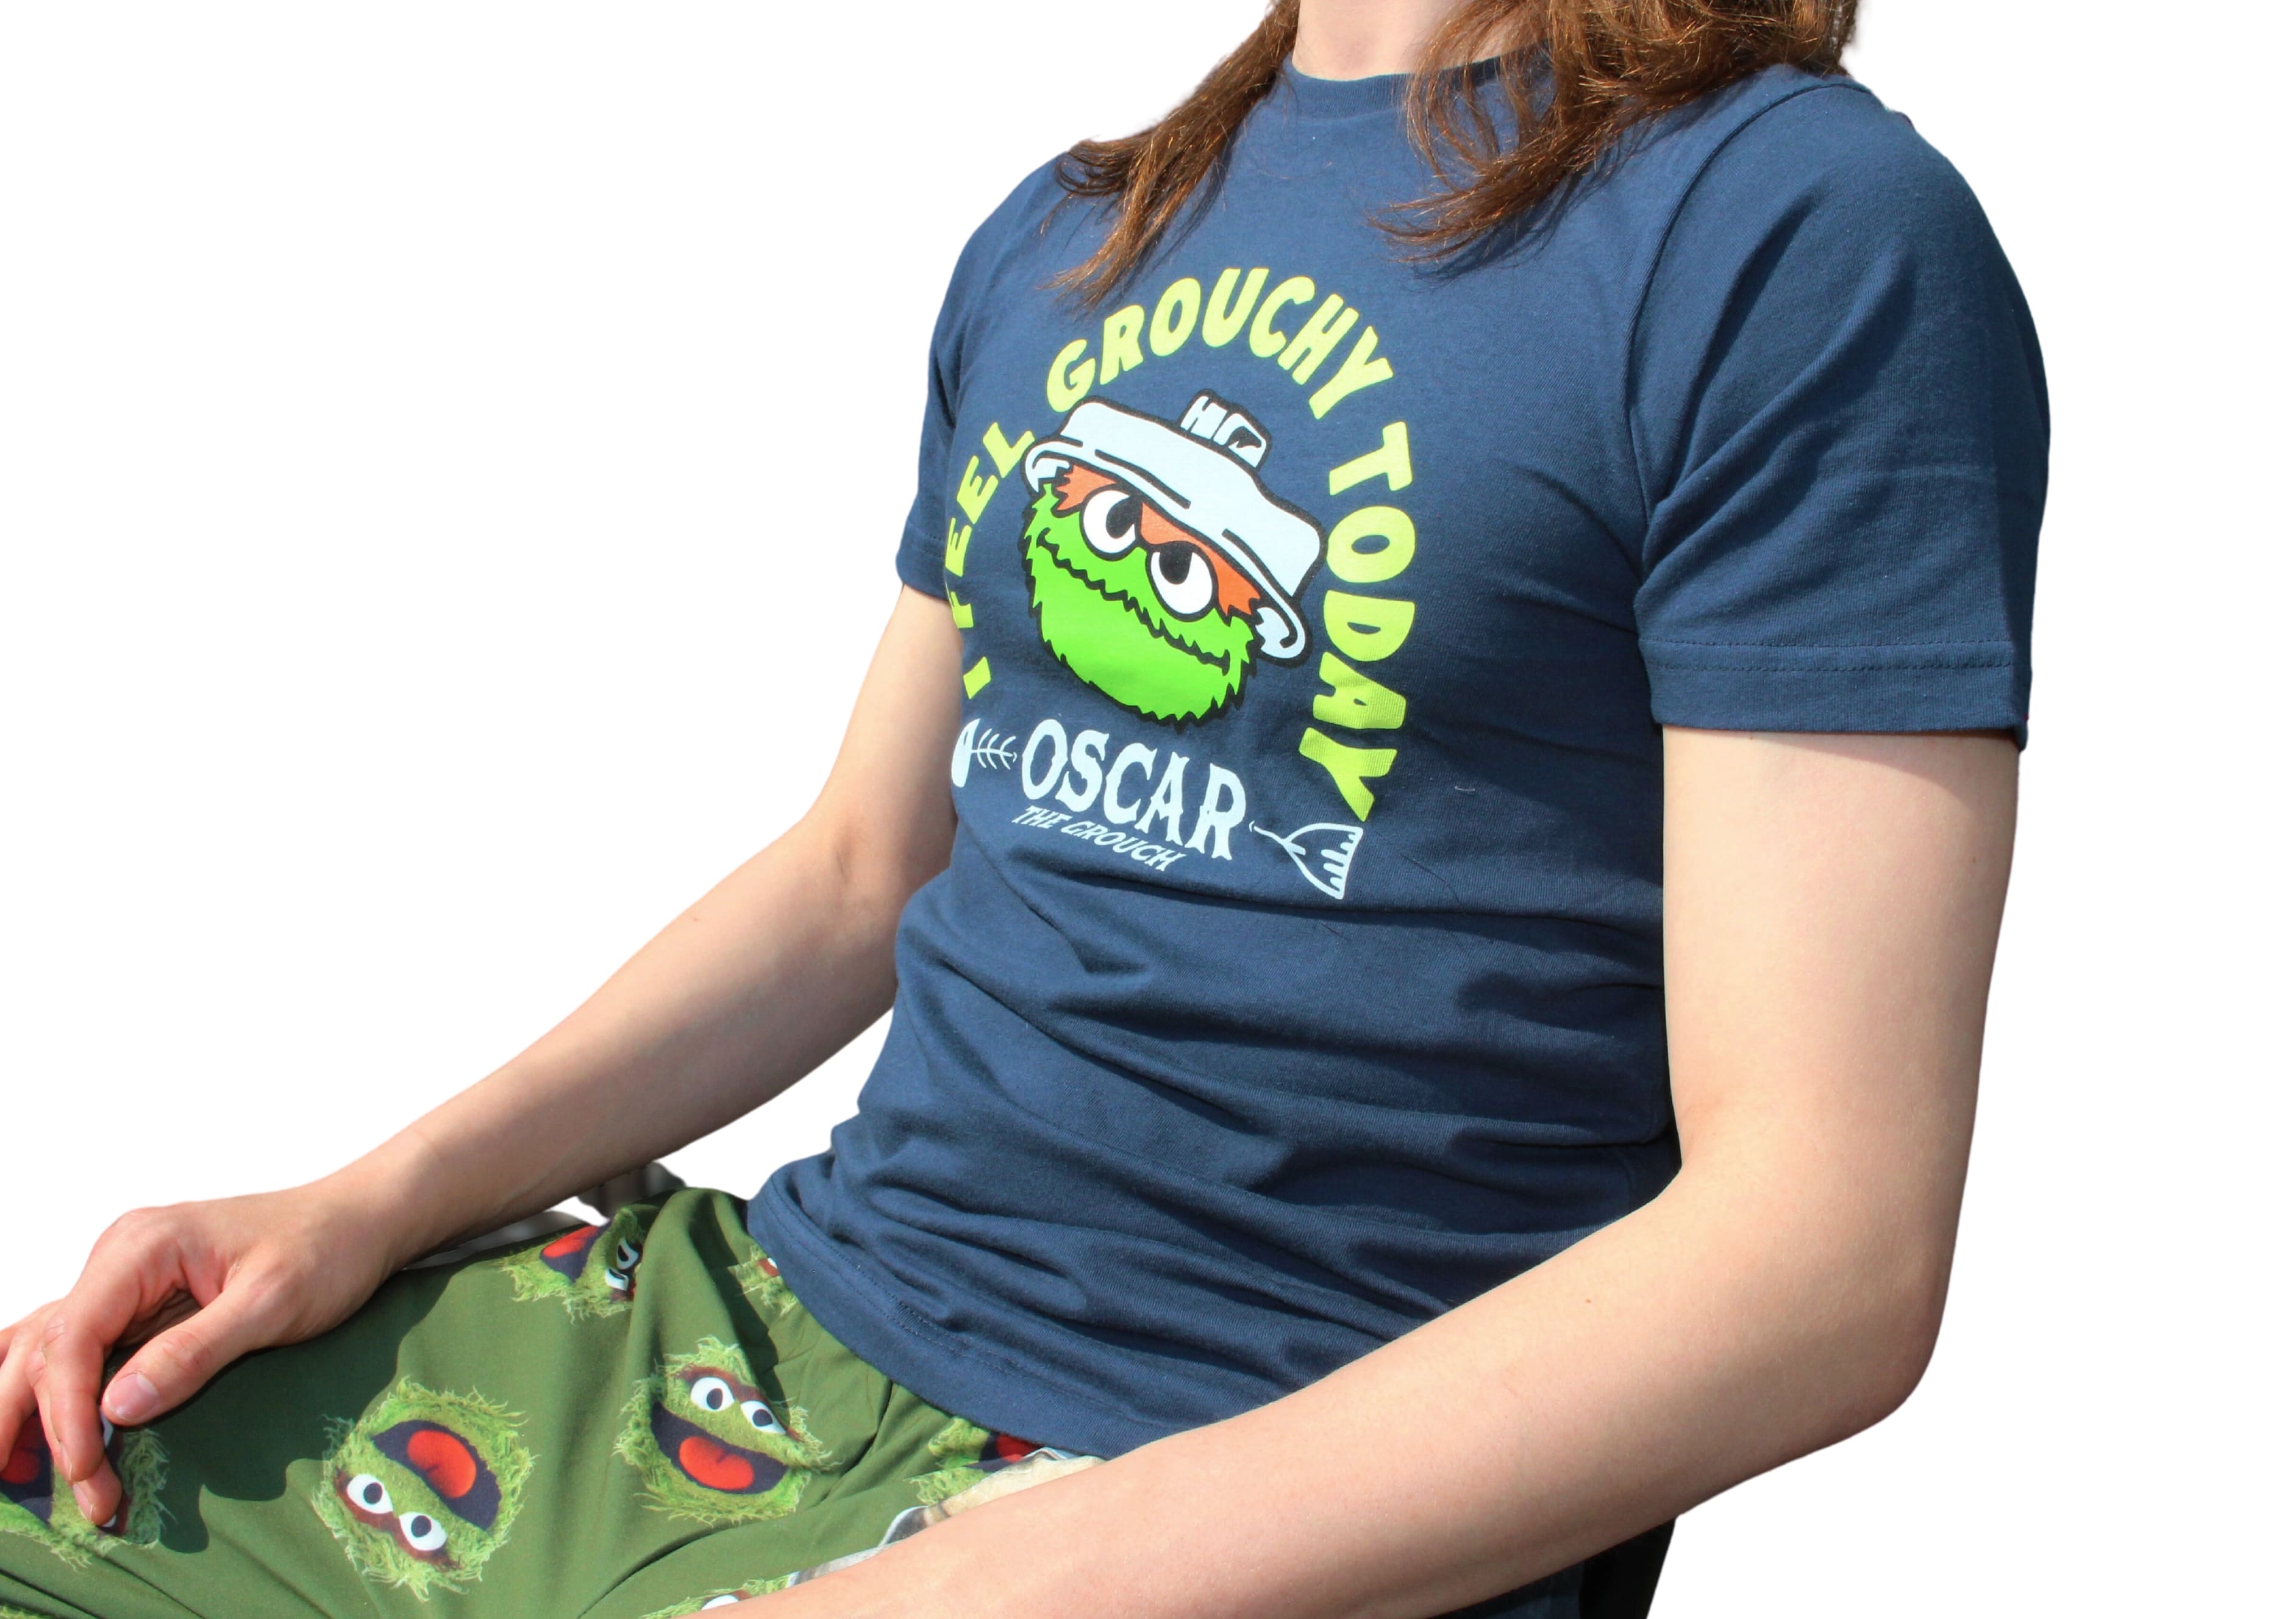 I Feel Grouchy shirt on model sitting front/side angle view